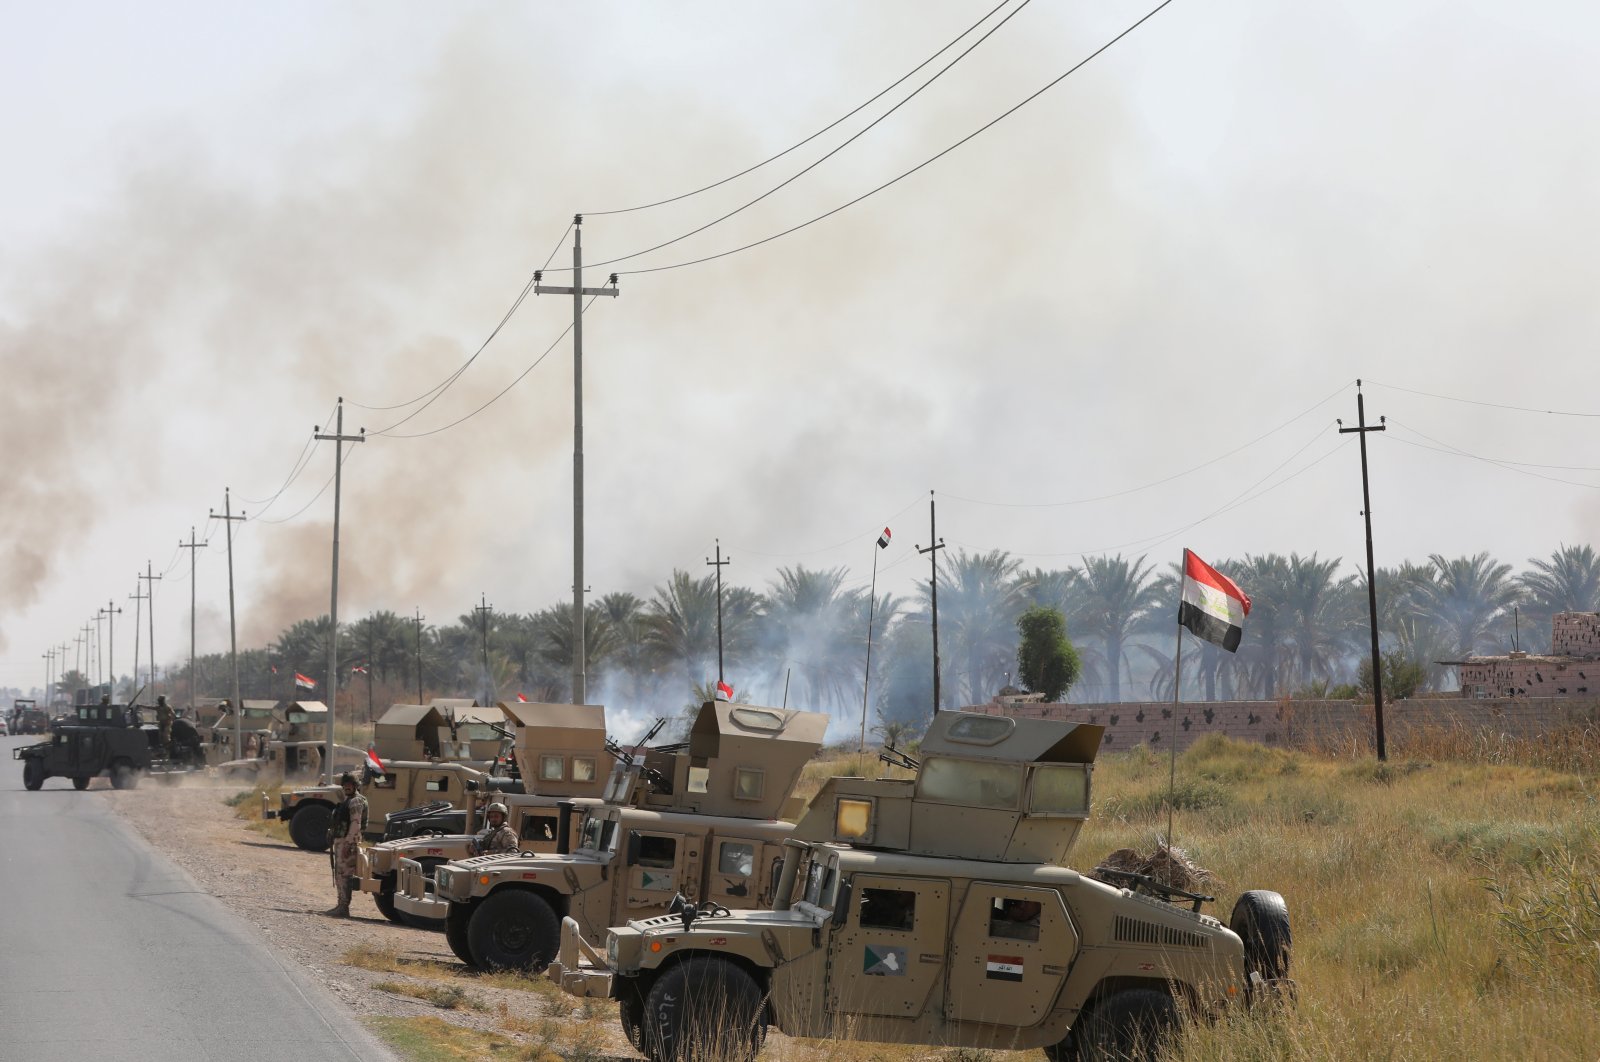 Military vehicles of Iraqi security forces are seen after an attack by Daesh terrorists, near Muqdadiya, Iraq, Oct. 27, 2021. (Reuters File Photo)